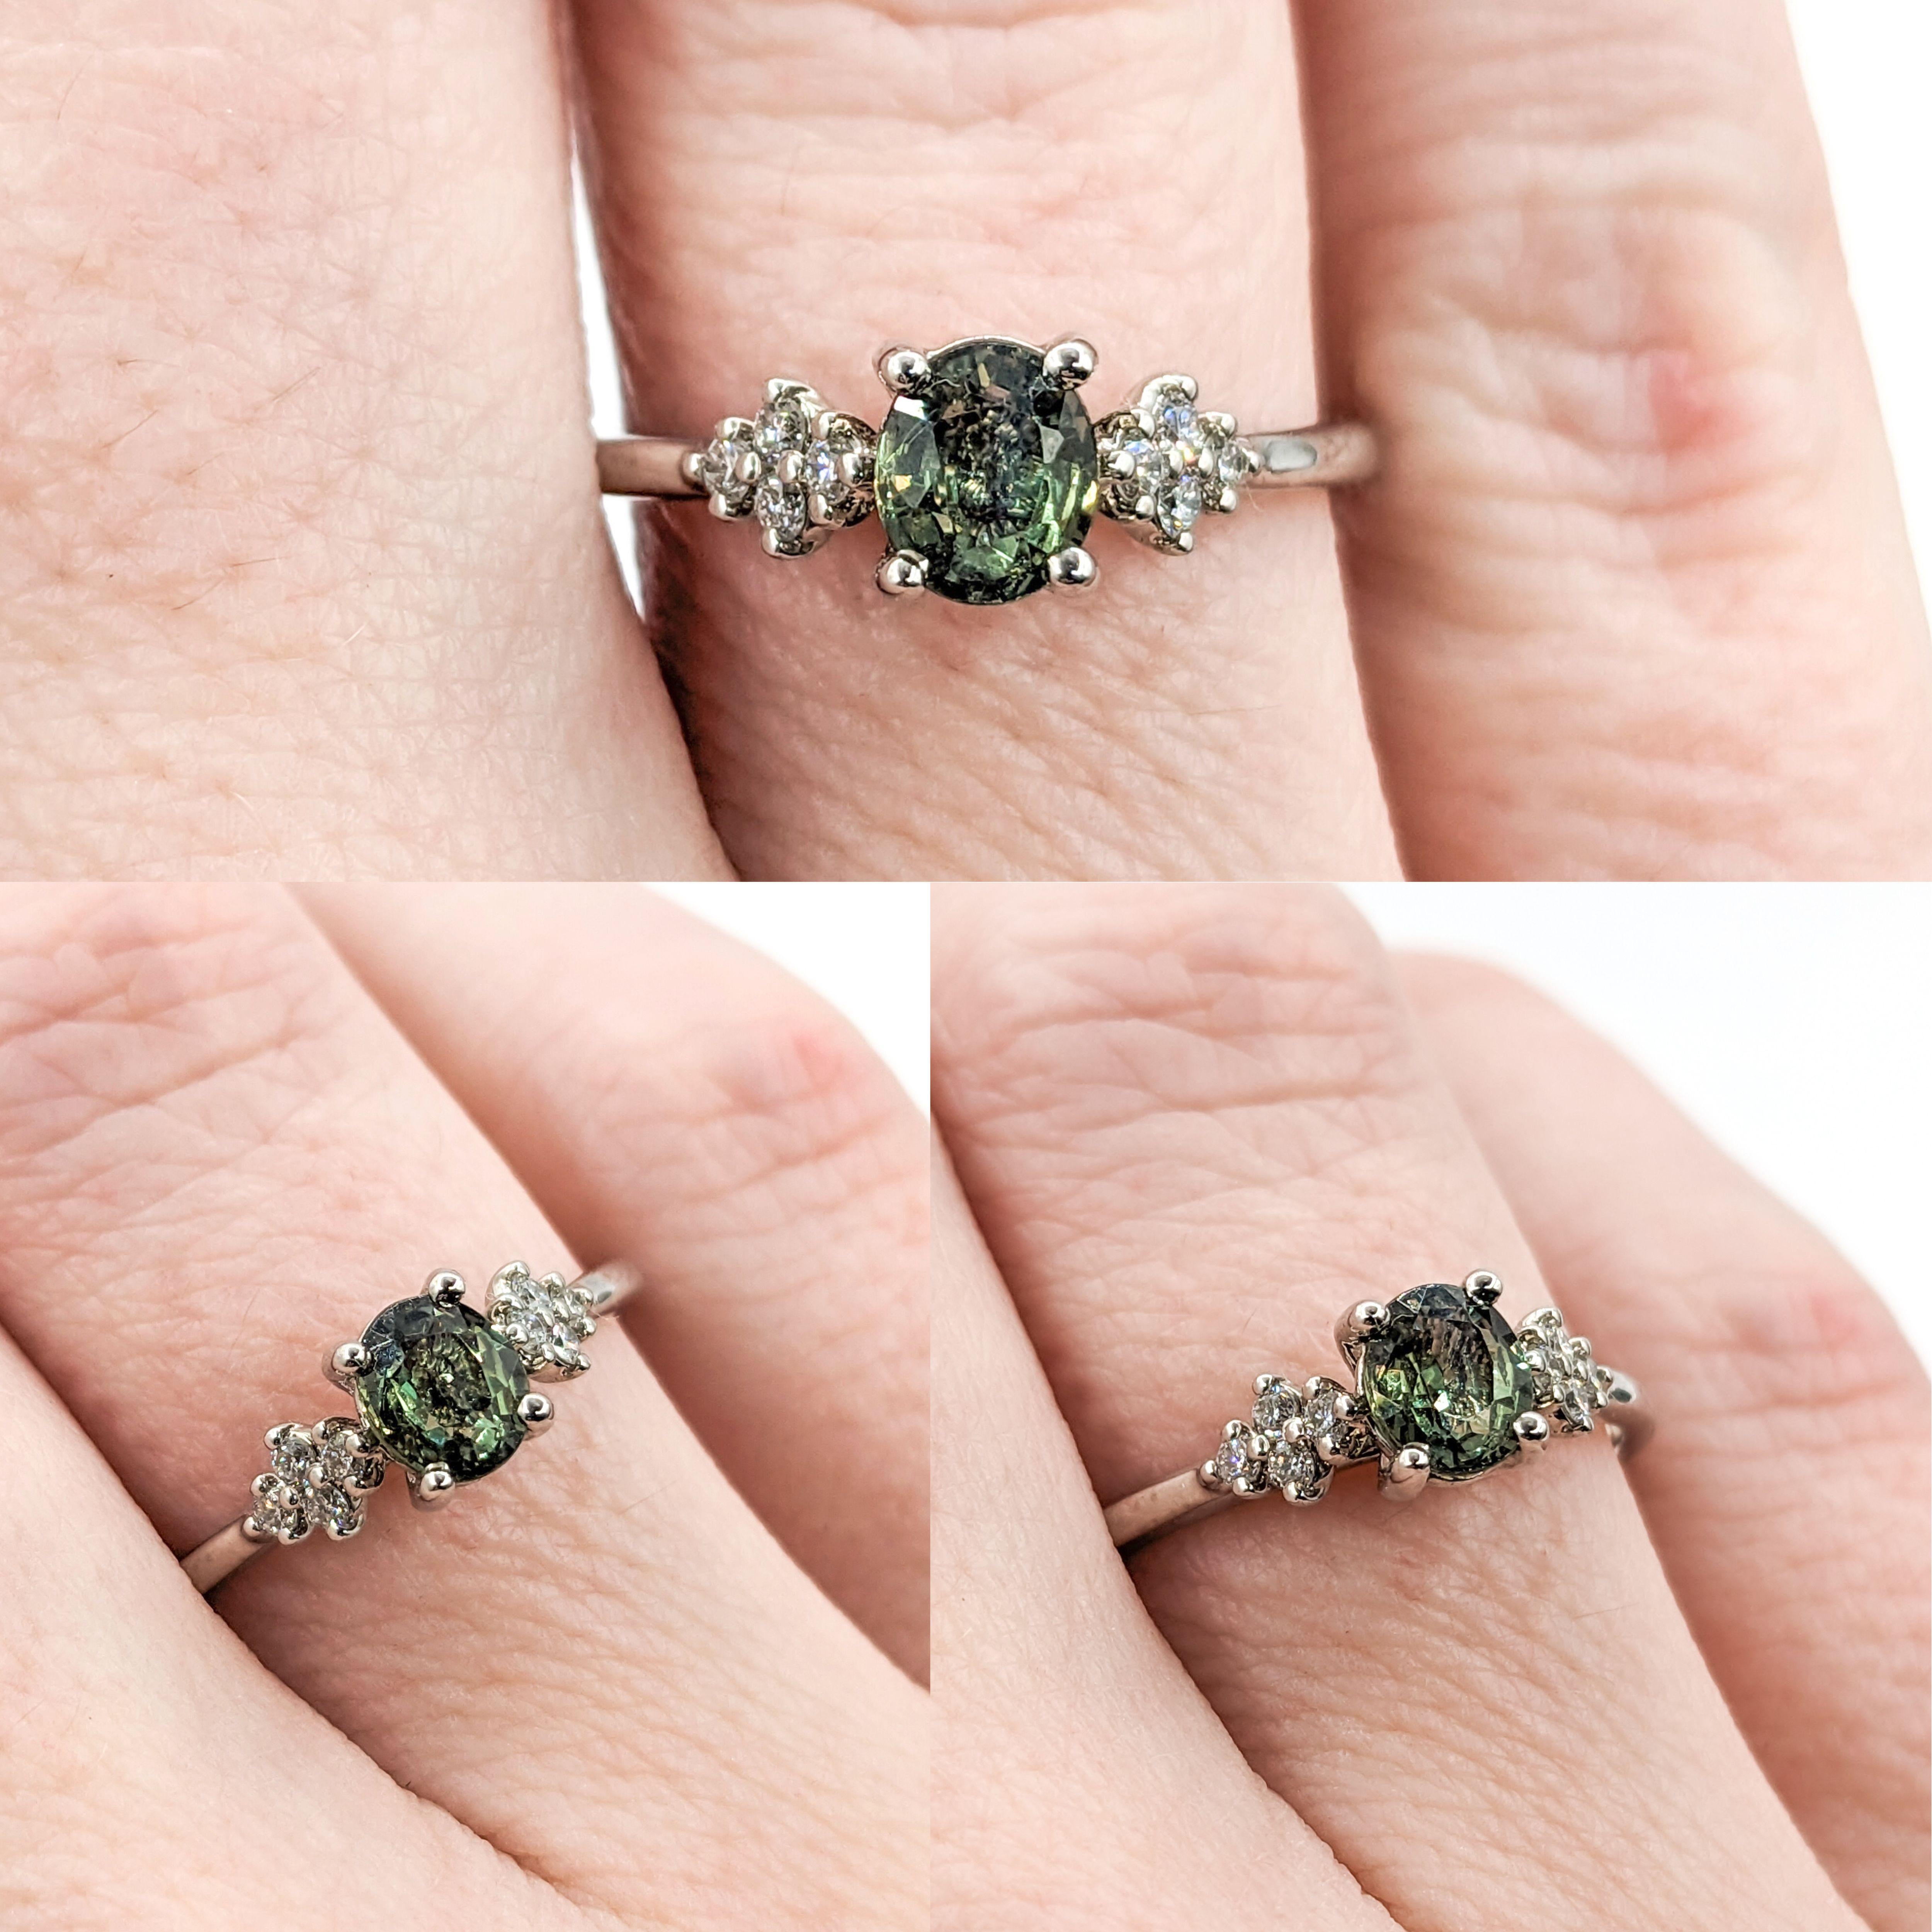 Natural Alexandrite & Diamond Ring White Gold

Introducing an exquisite Ring, masterfully created from 14kt White Gold and adorned with .06ctw Diamonds that dazzle with VS clarity and a Near Colorless shimmer. The centerpiece of the ring is a .54ct